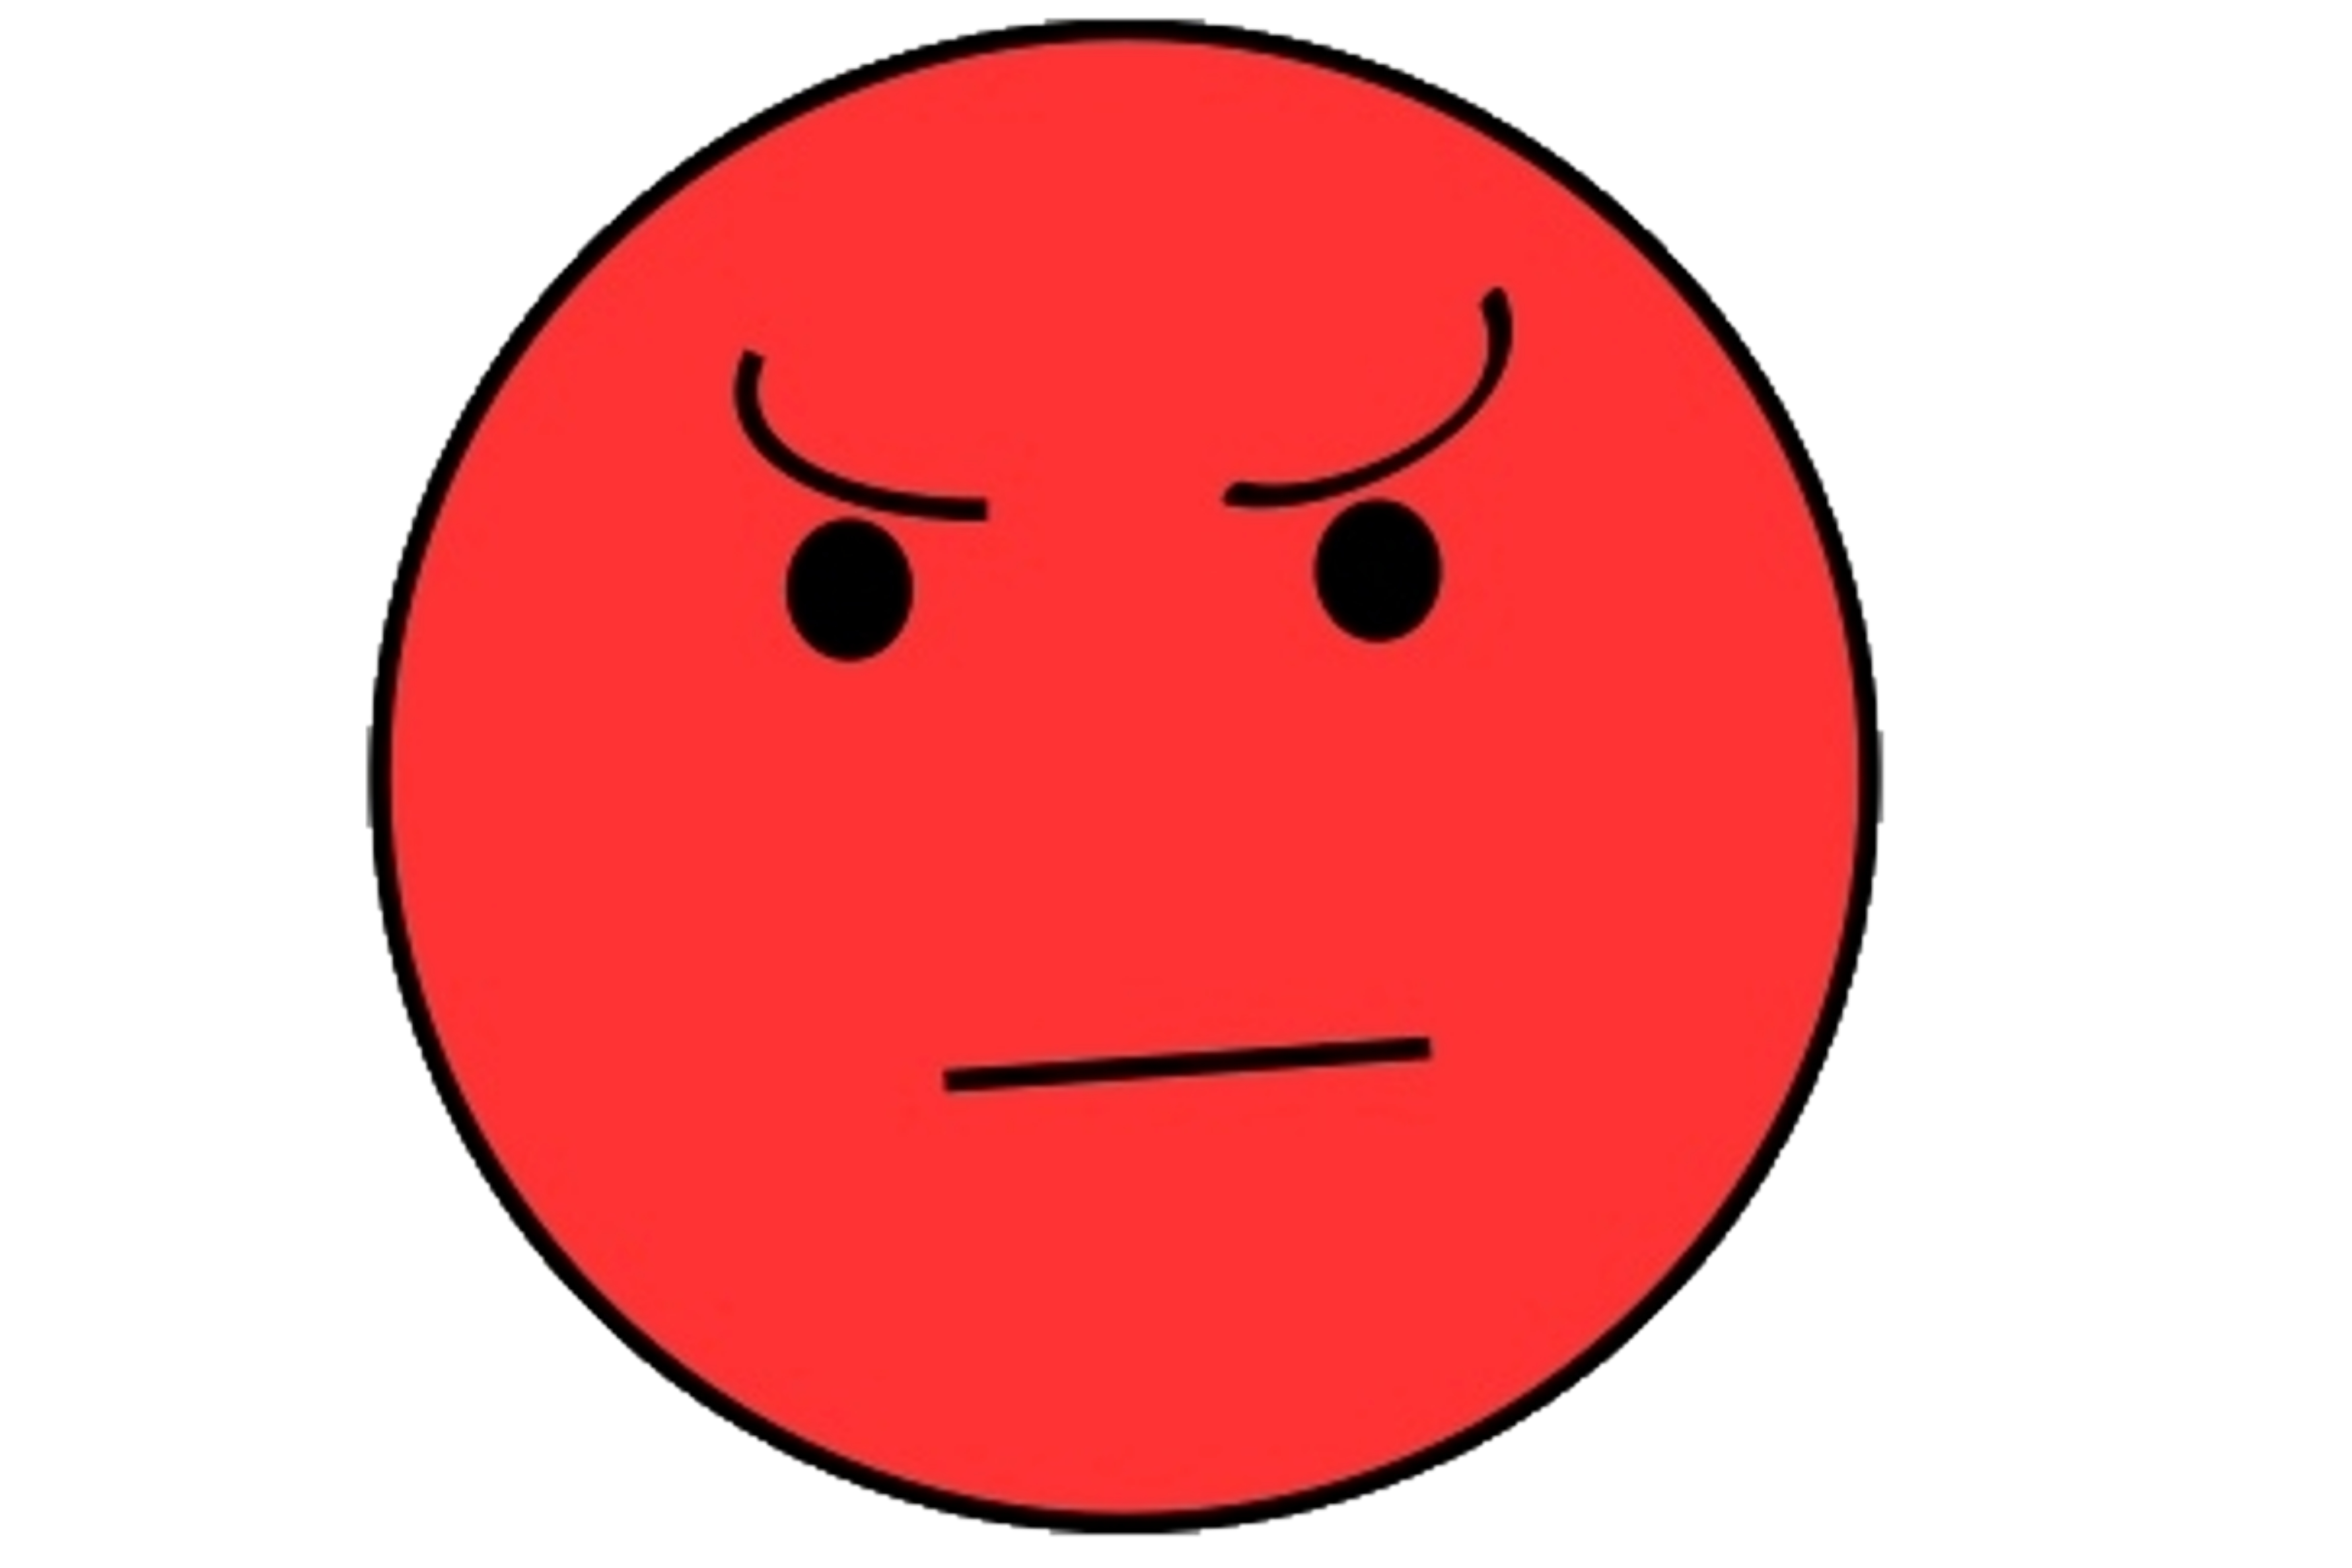 Angry face clipart cool